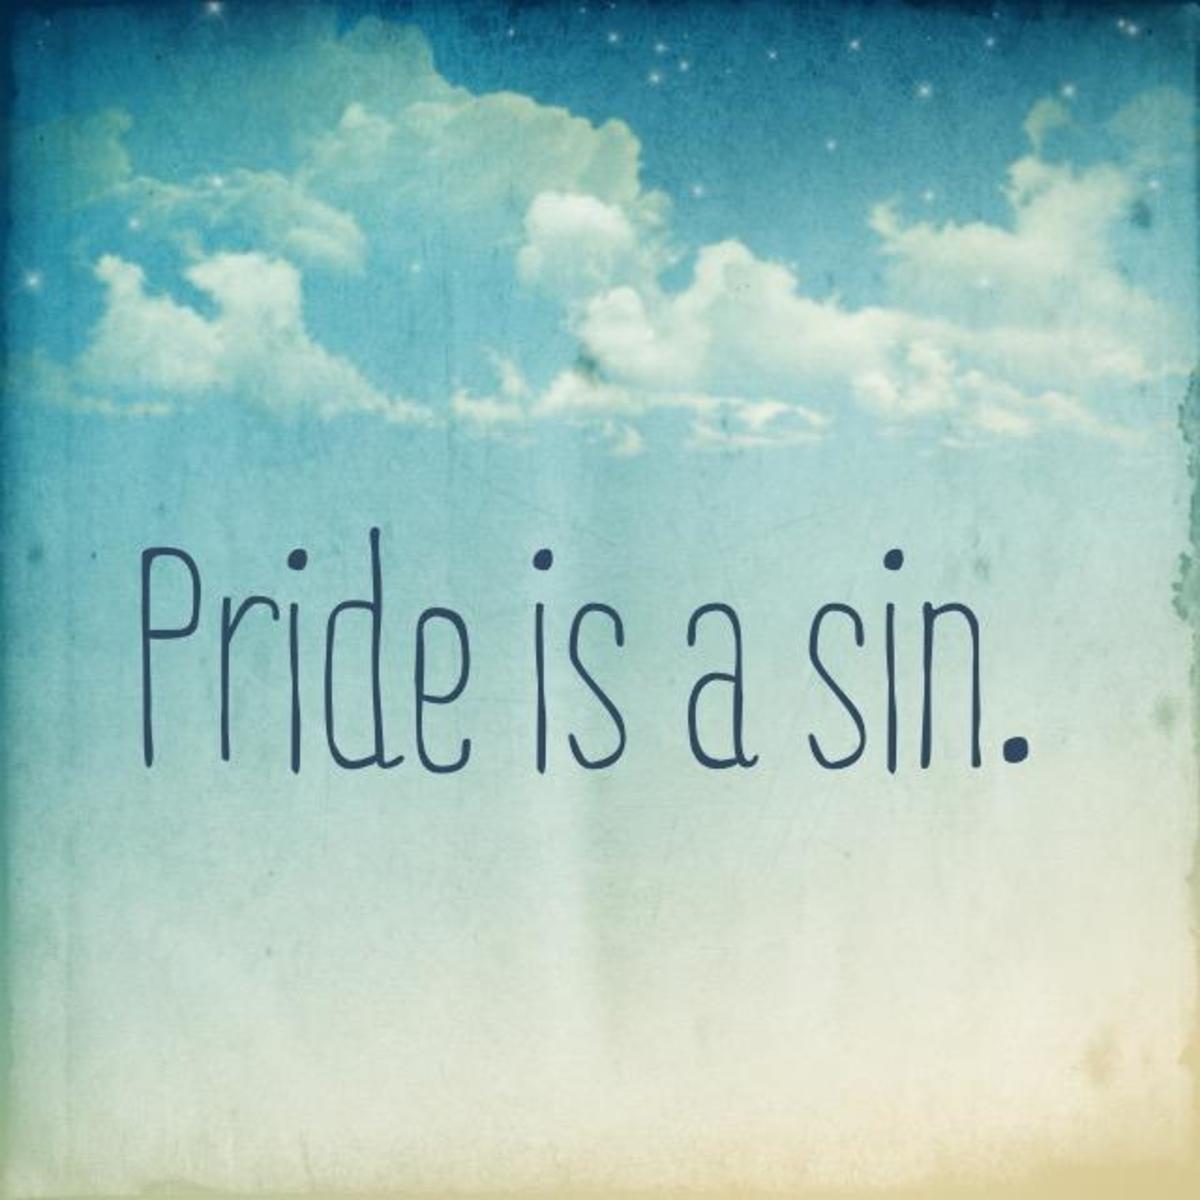 What the Bible Says About Pride